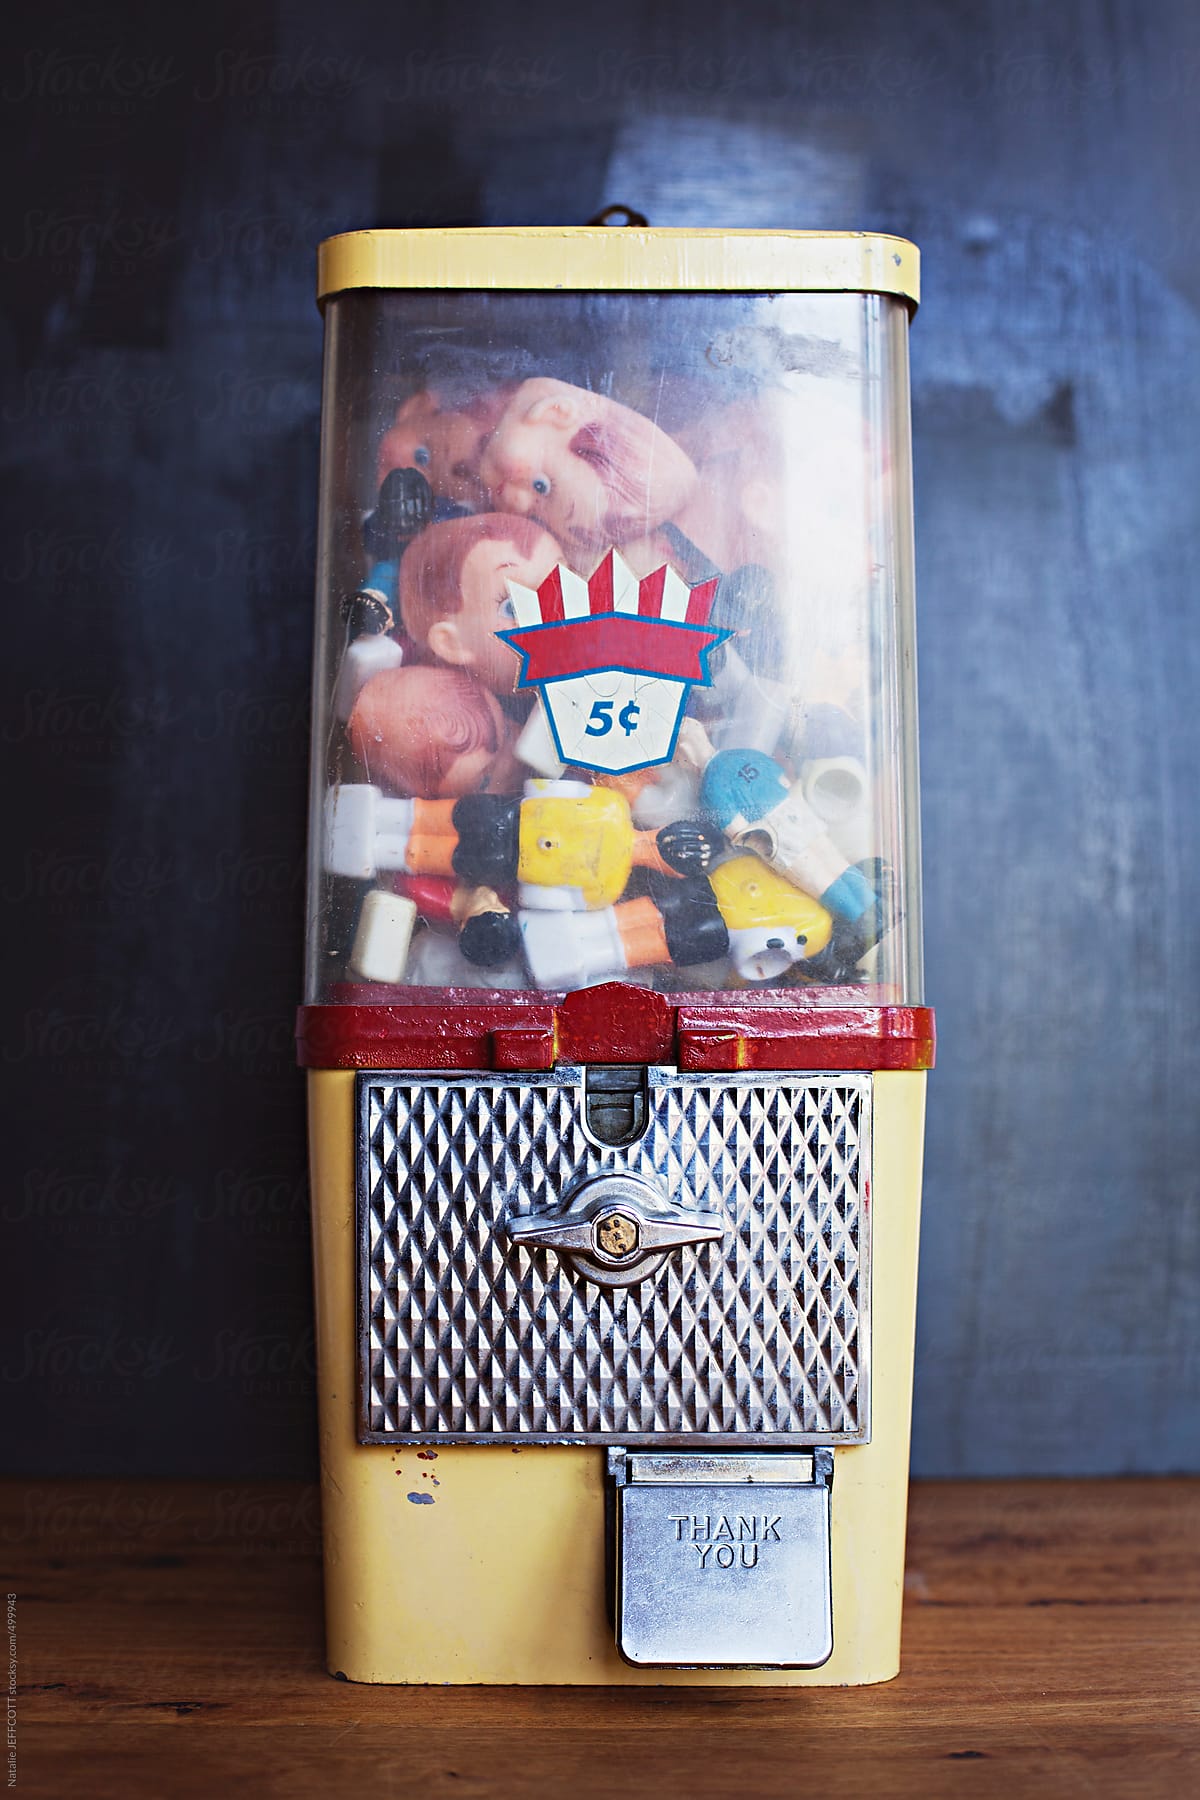 A vintage gumball machine filled with old toys and doll faces